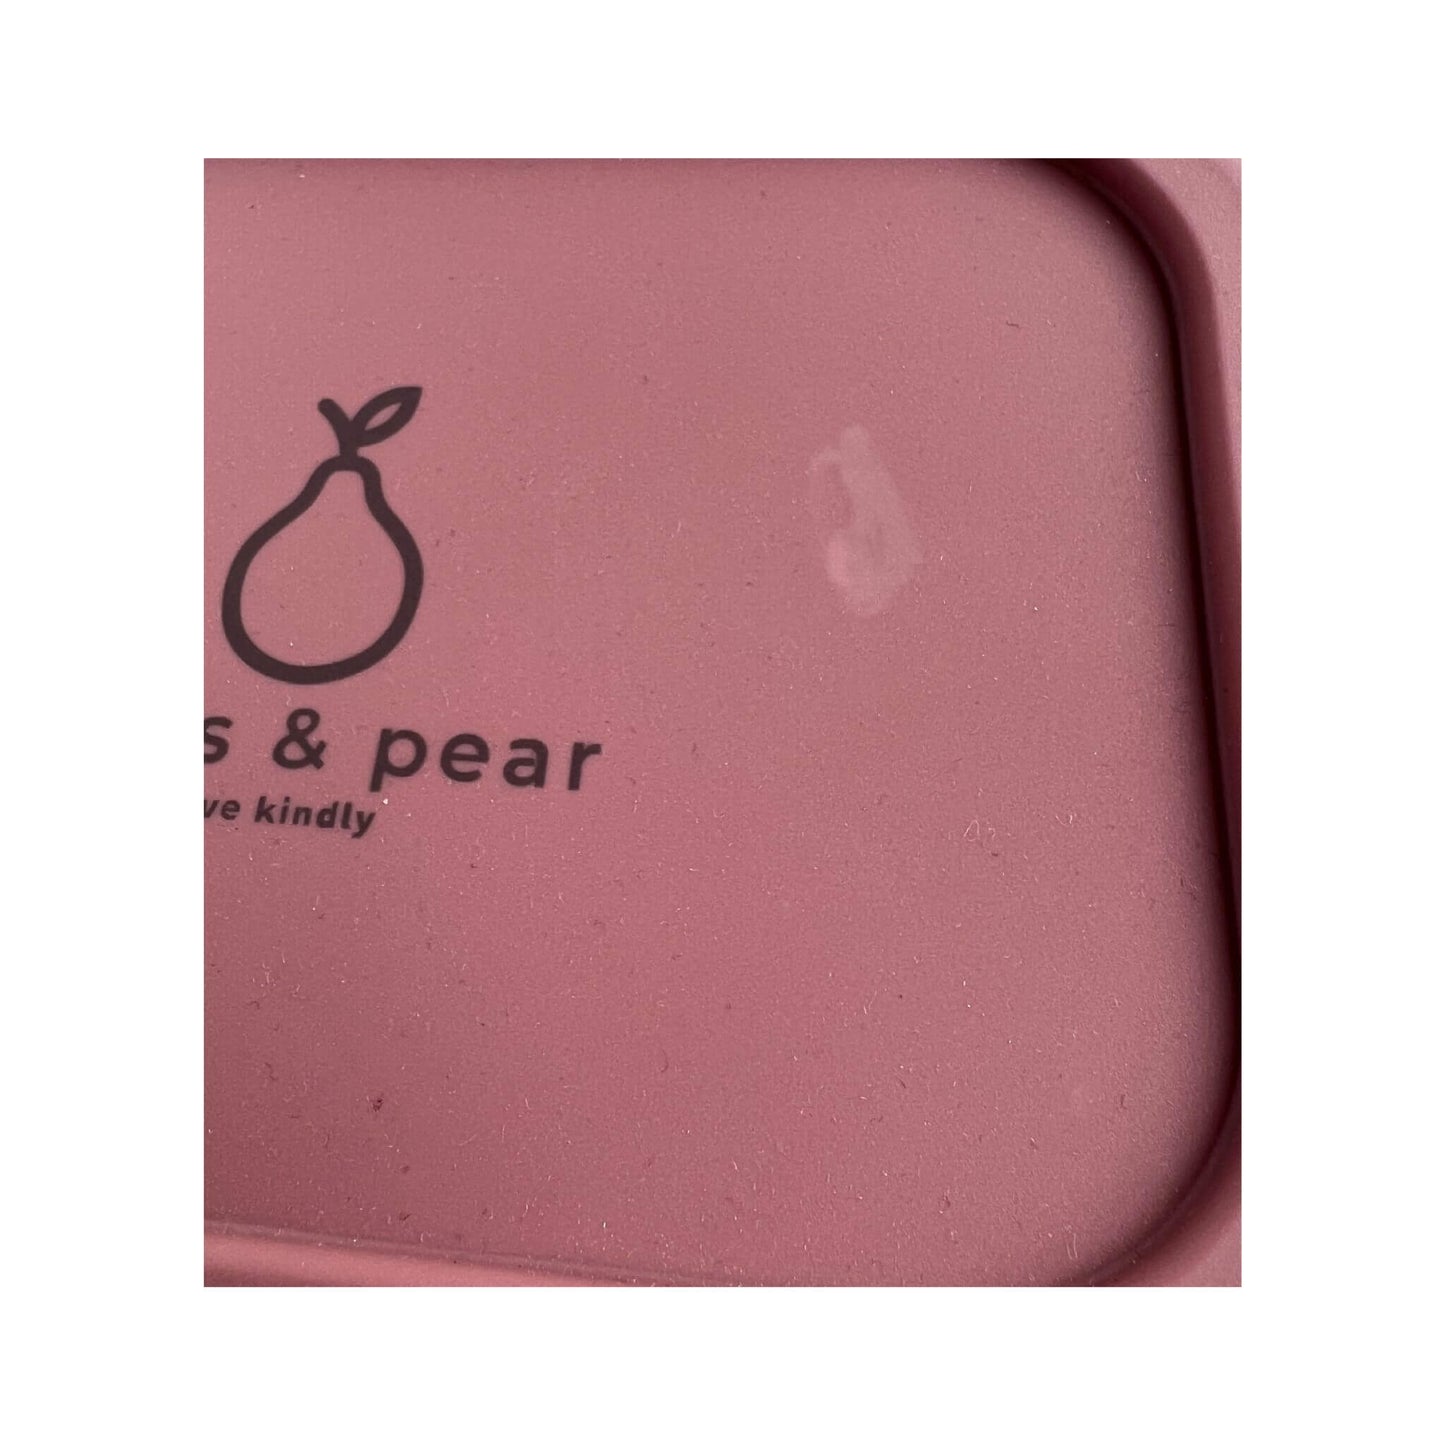 moss & pear seconds silicone bento lunch box with slight imperfection